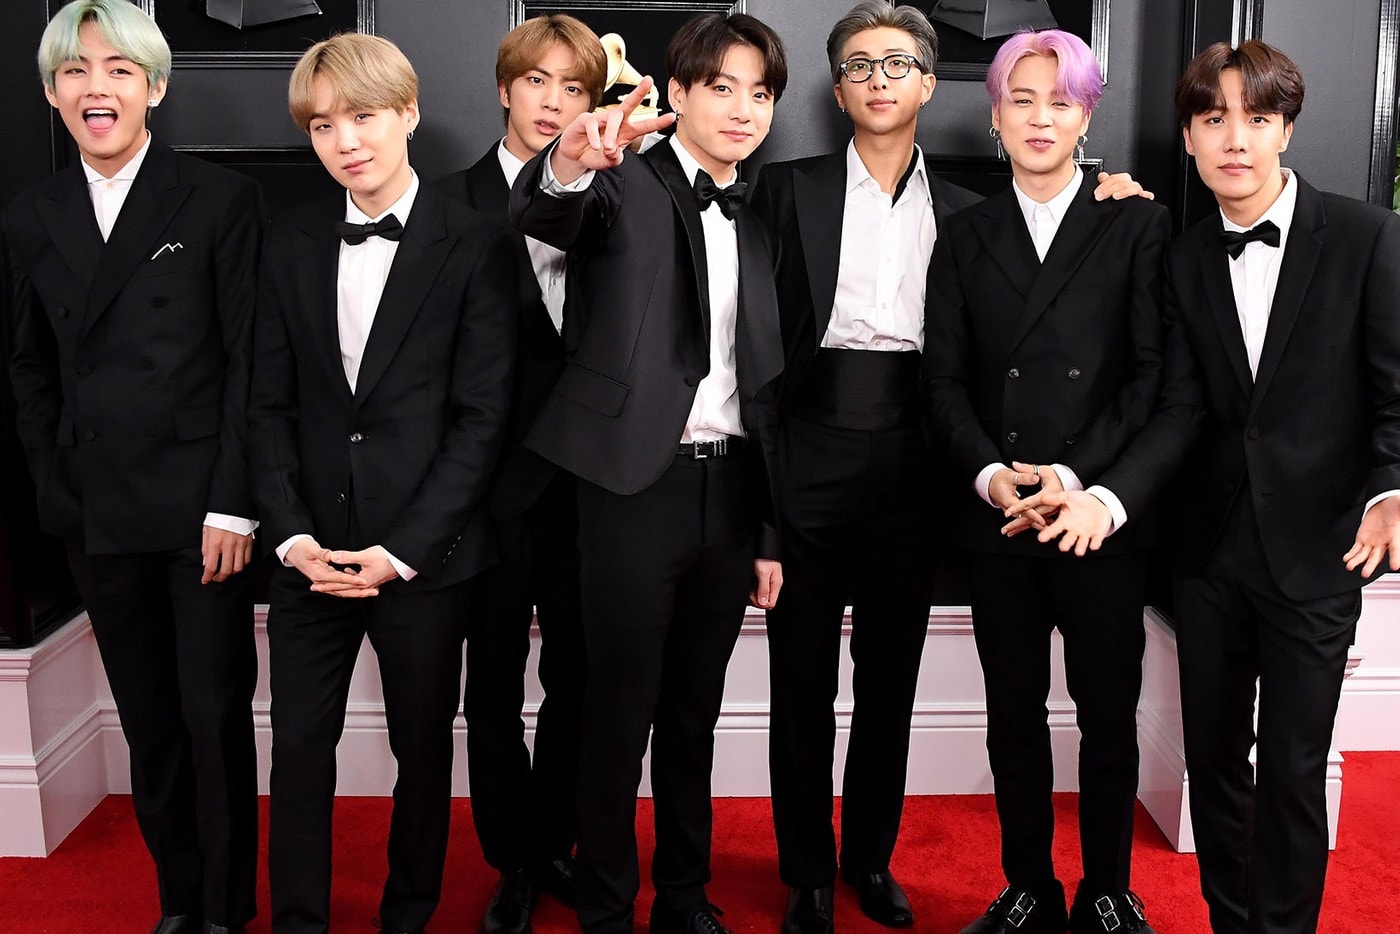 BTS Have Been Invited to The Recording Academy INvitation Grammy Awards Music Diversity Inclusion Effort Outreach 